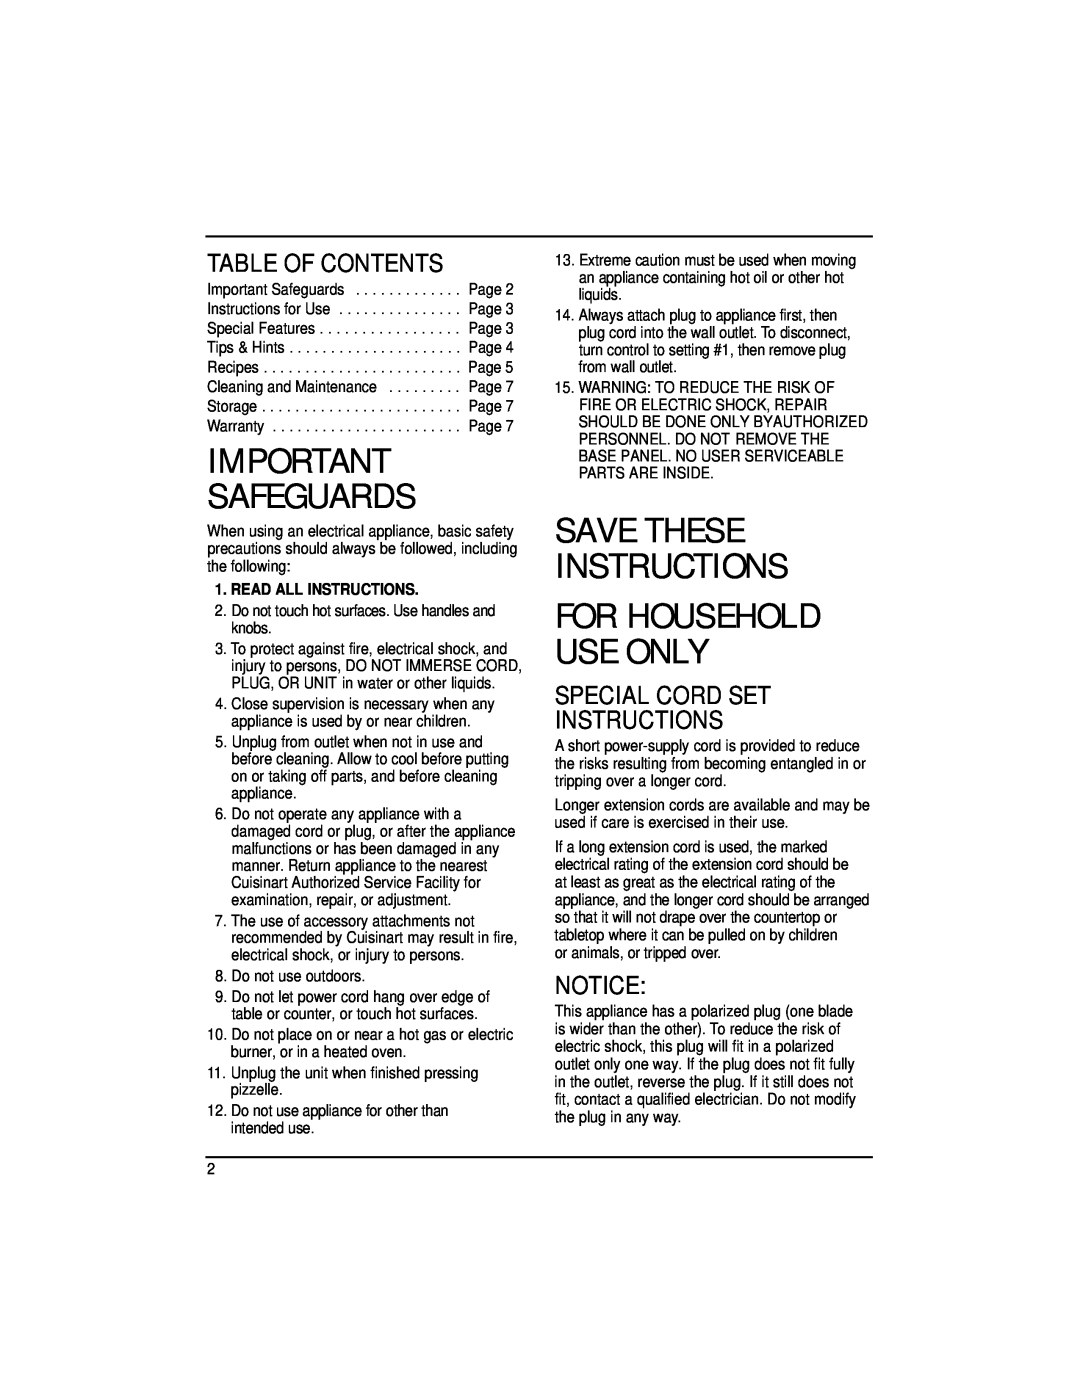 Cuisinart WM-PZ2 manual Table Of Contents, Special Cord Set Instructions, Safeguards, Save These Instructions 